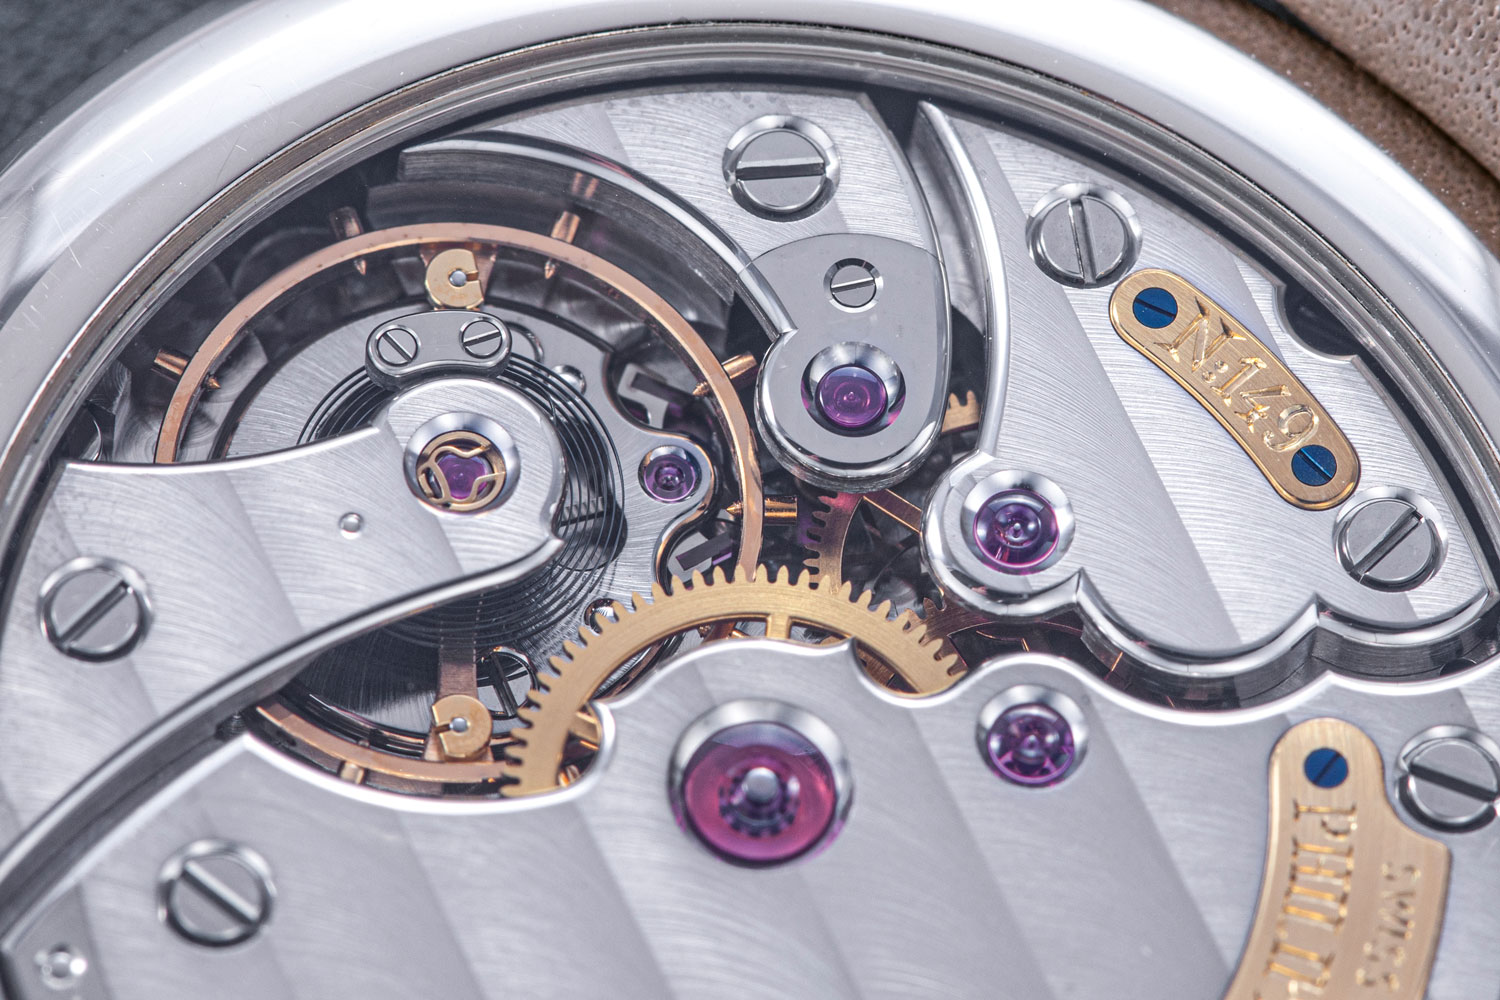 The impeccably finished movement of the watch with sharp inward and outward angles.(Image :The Hour Glass)